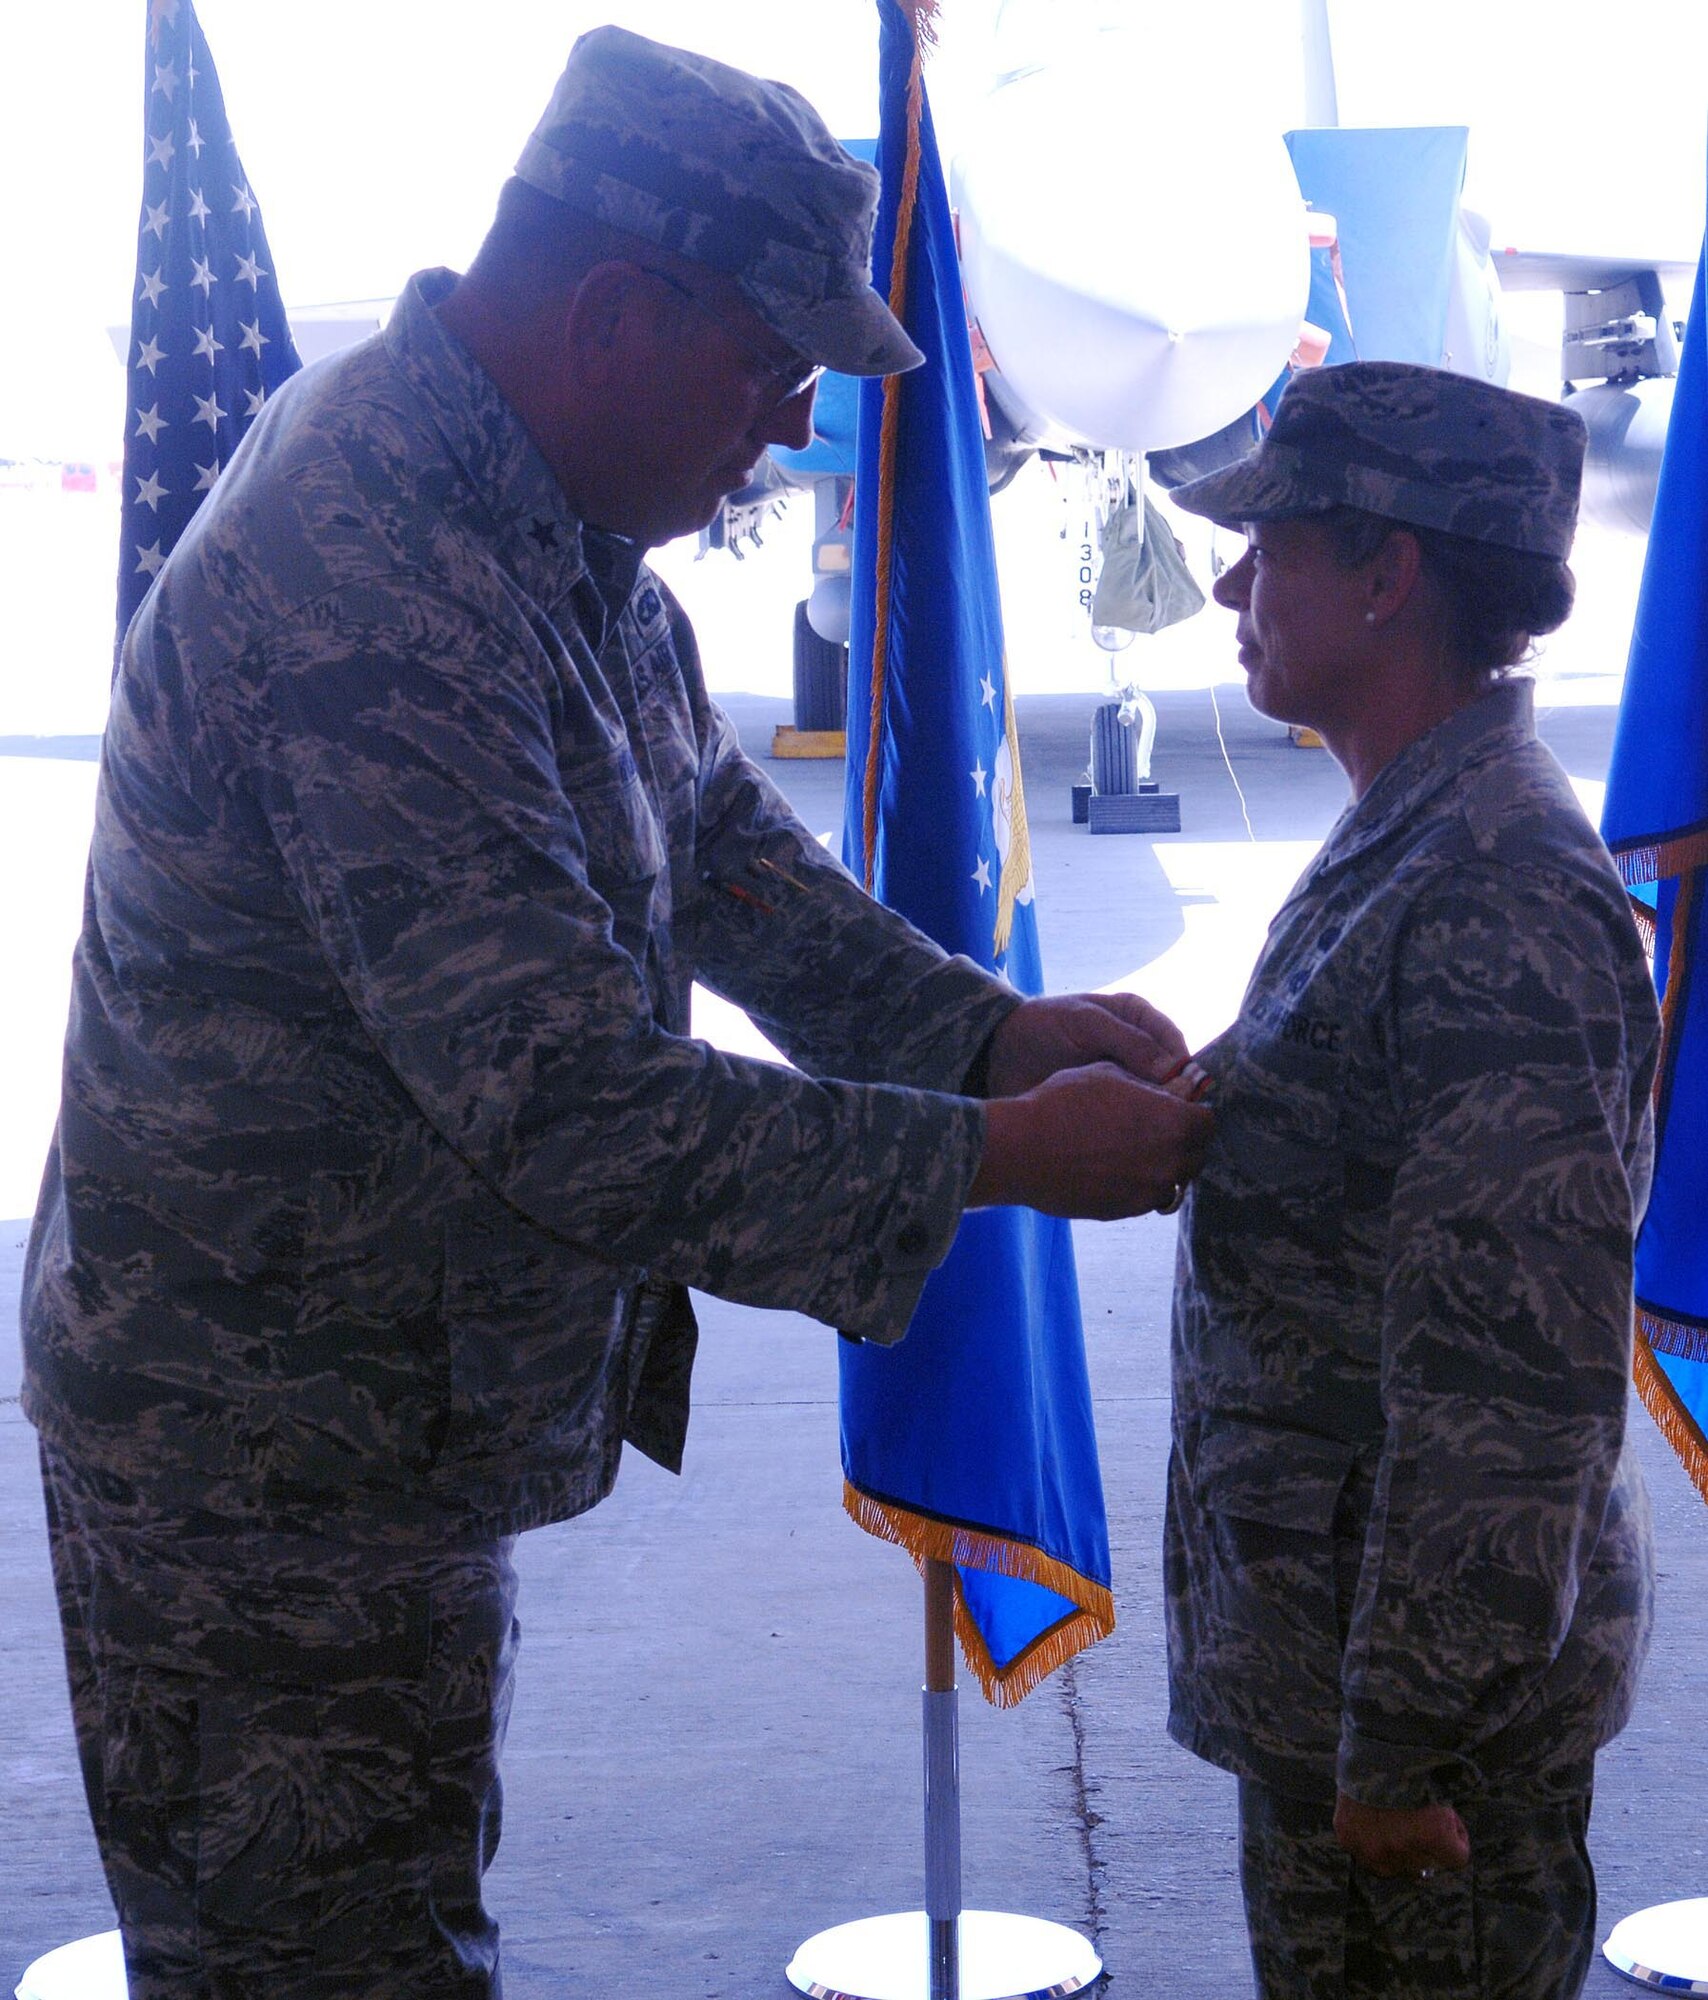 Brig. Gen. Bill Hyatt (left), 455th Air Expeditionary Wing commander, awards Col. Jennifer Walter, 755th Air Expeditionary Group commander, with the Afghanistan Campaign Medal at a change of command ceremony July 1 at Bagram Airfield, Afghanistan. (U.S. Air Force photo by Staff Sgt. Craig Seals)